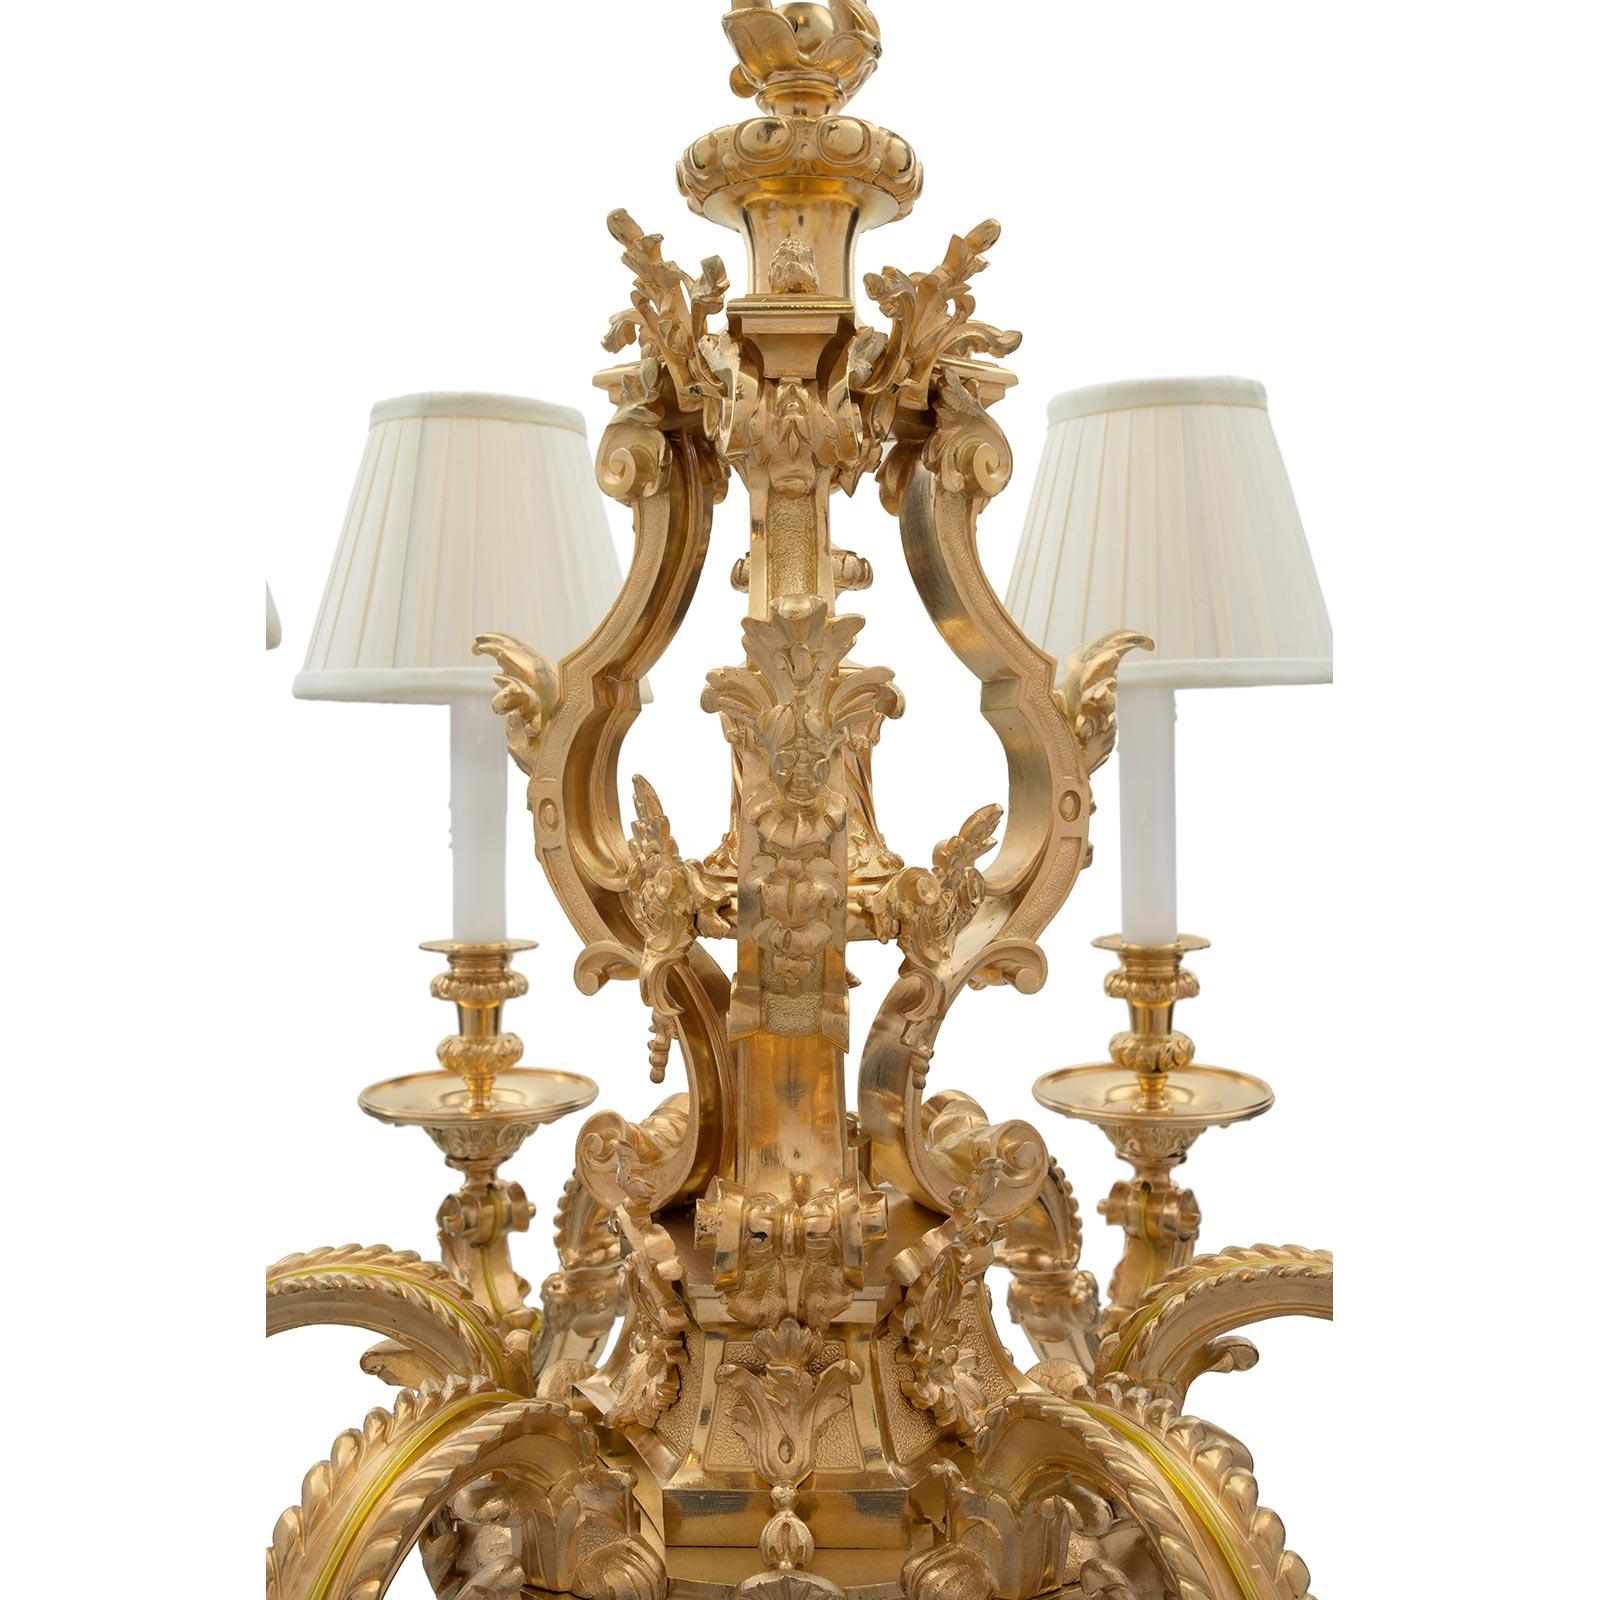  French 19th Century Renaissance Style Ormolu Six-Light Chandelier In Good Condition For Sale In West Palm Beach, FL